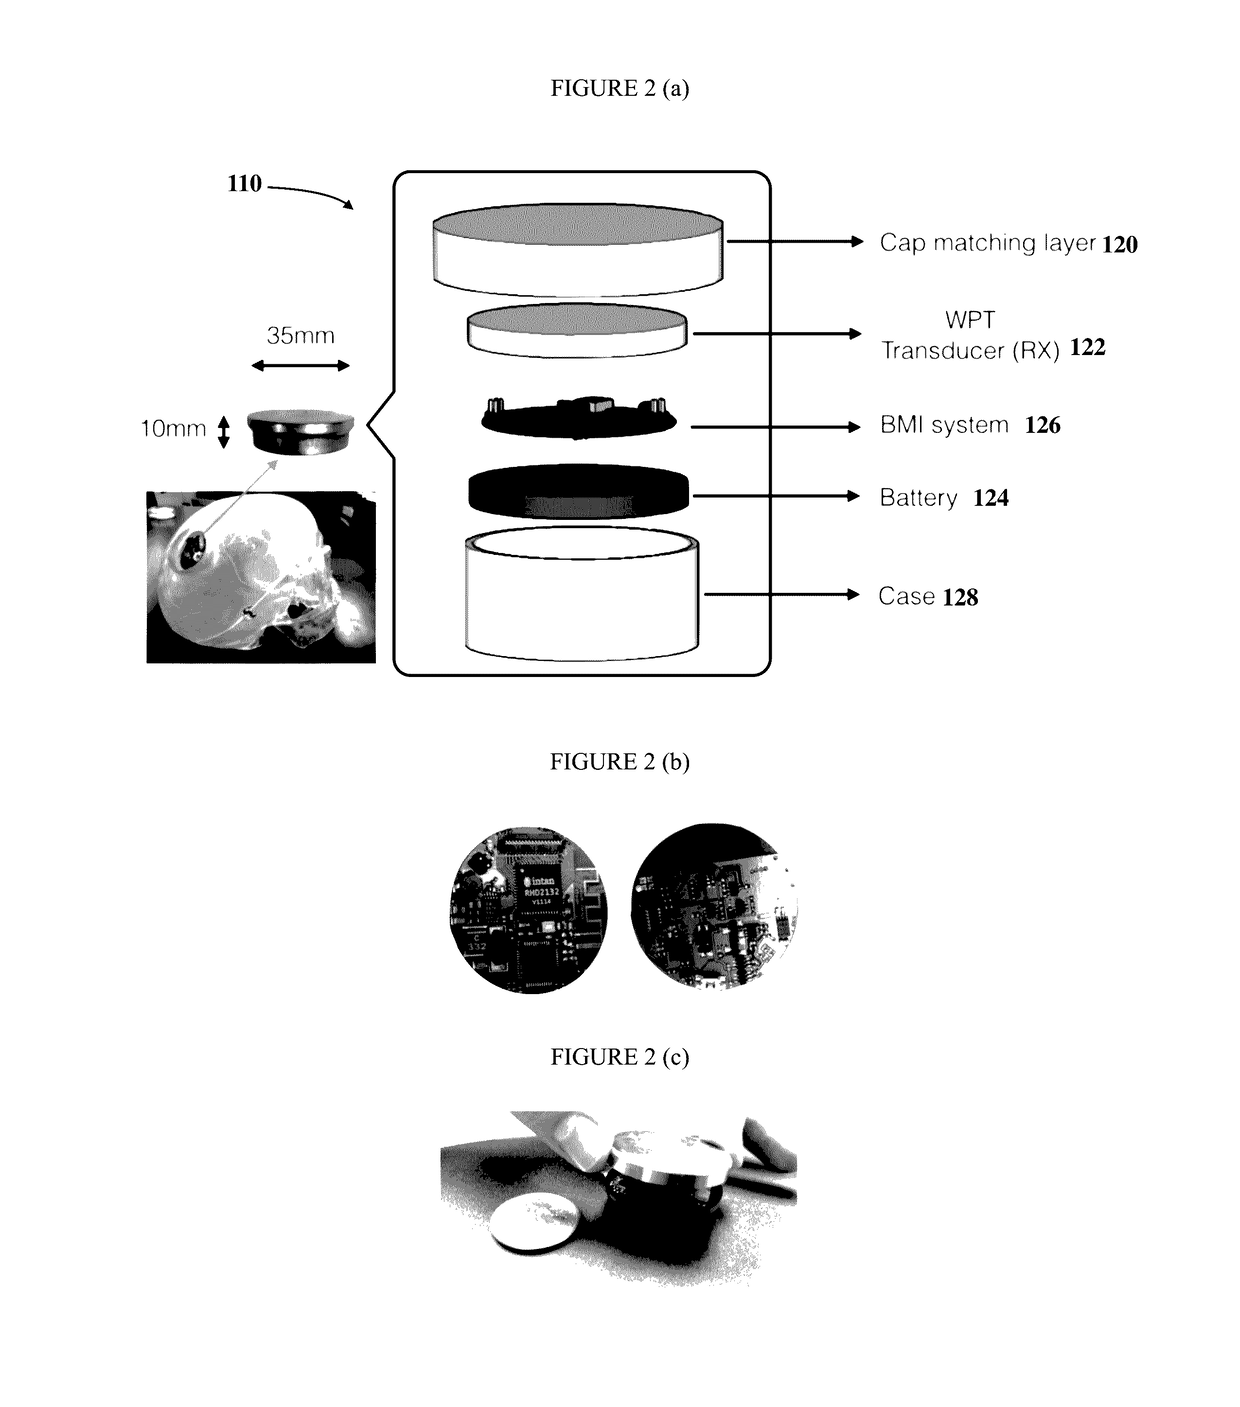 Apparatus and method of implantable bidirectional wireless neural recording and stimulation